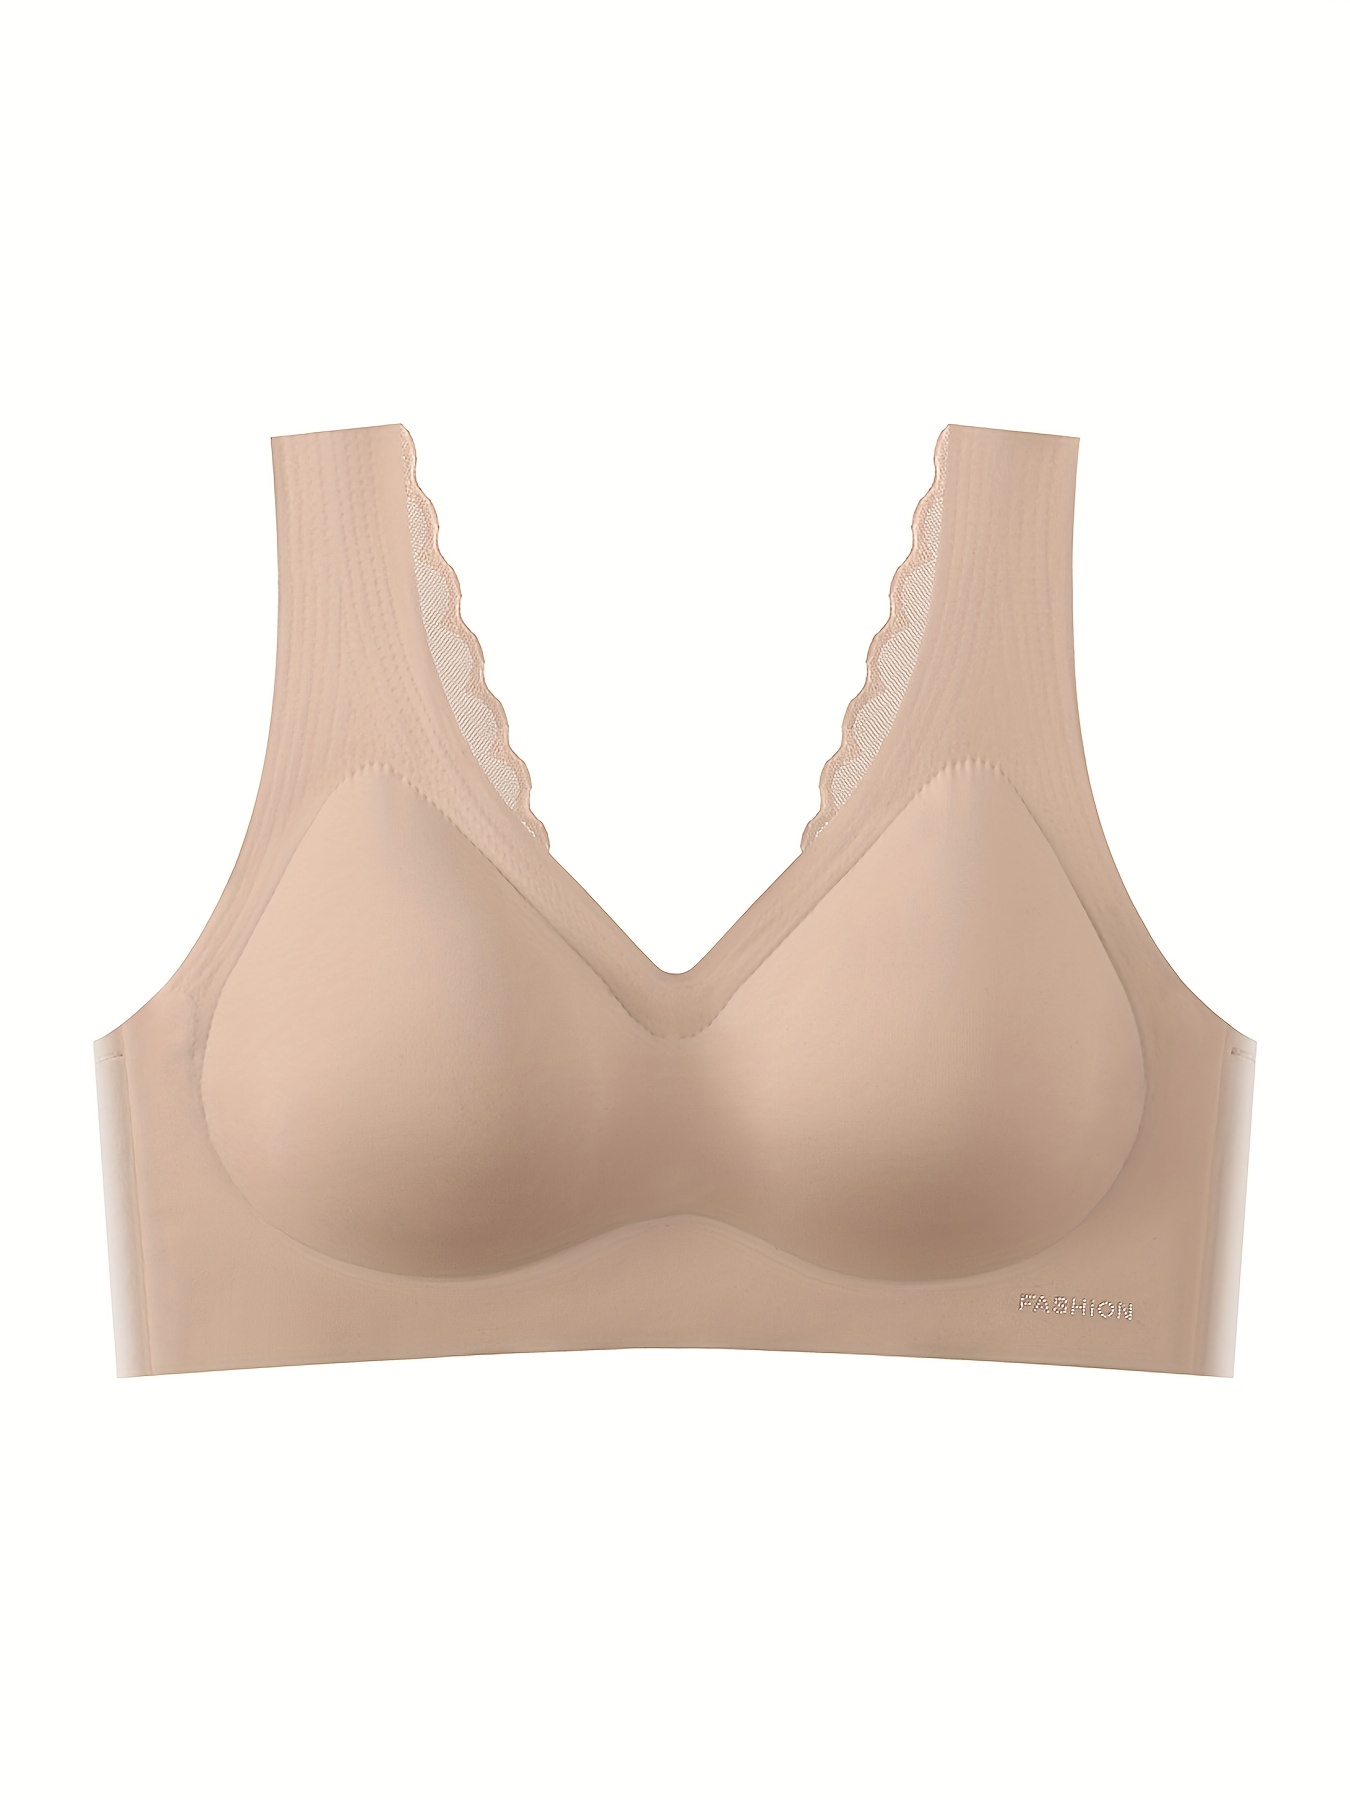 Cysincos Wireless Bras for Women Seamless Mesh Lace Comfortable